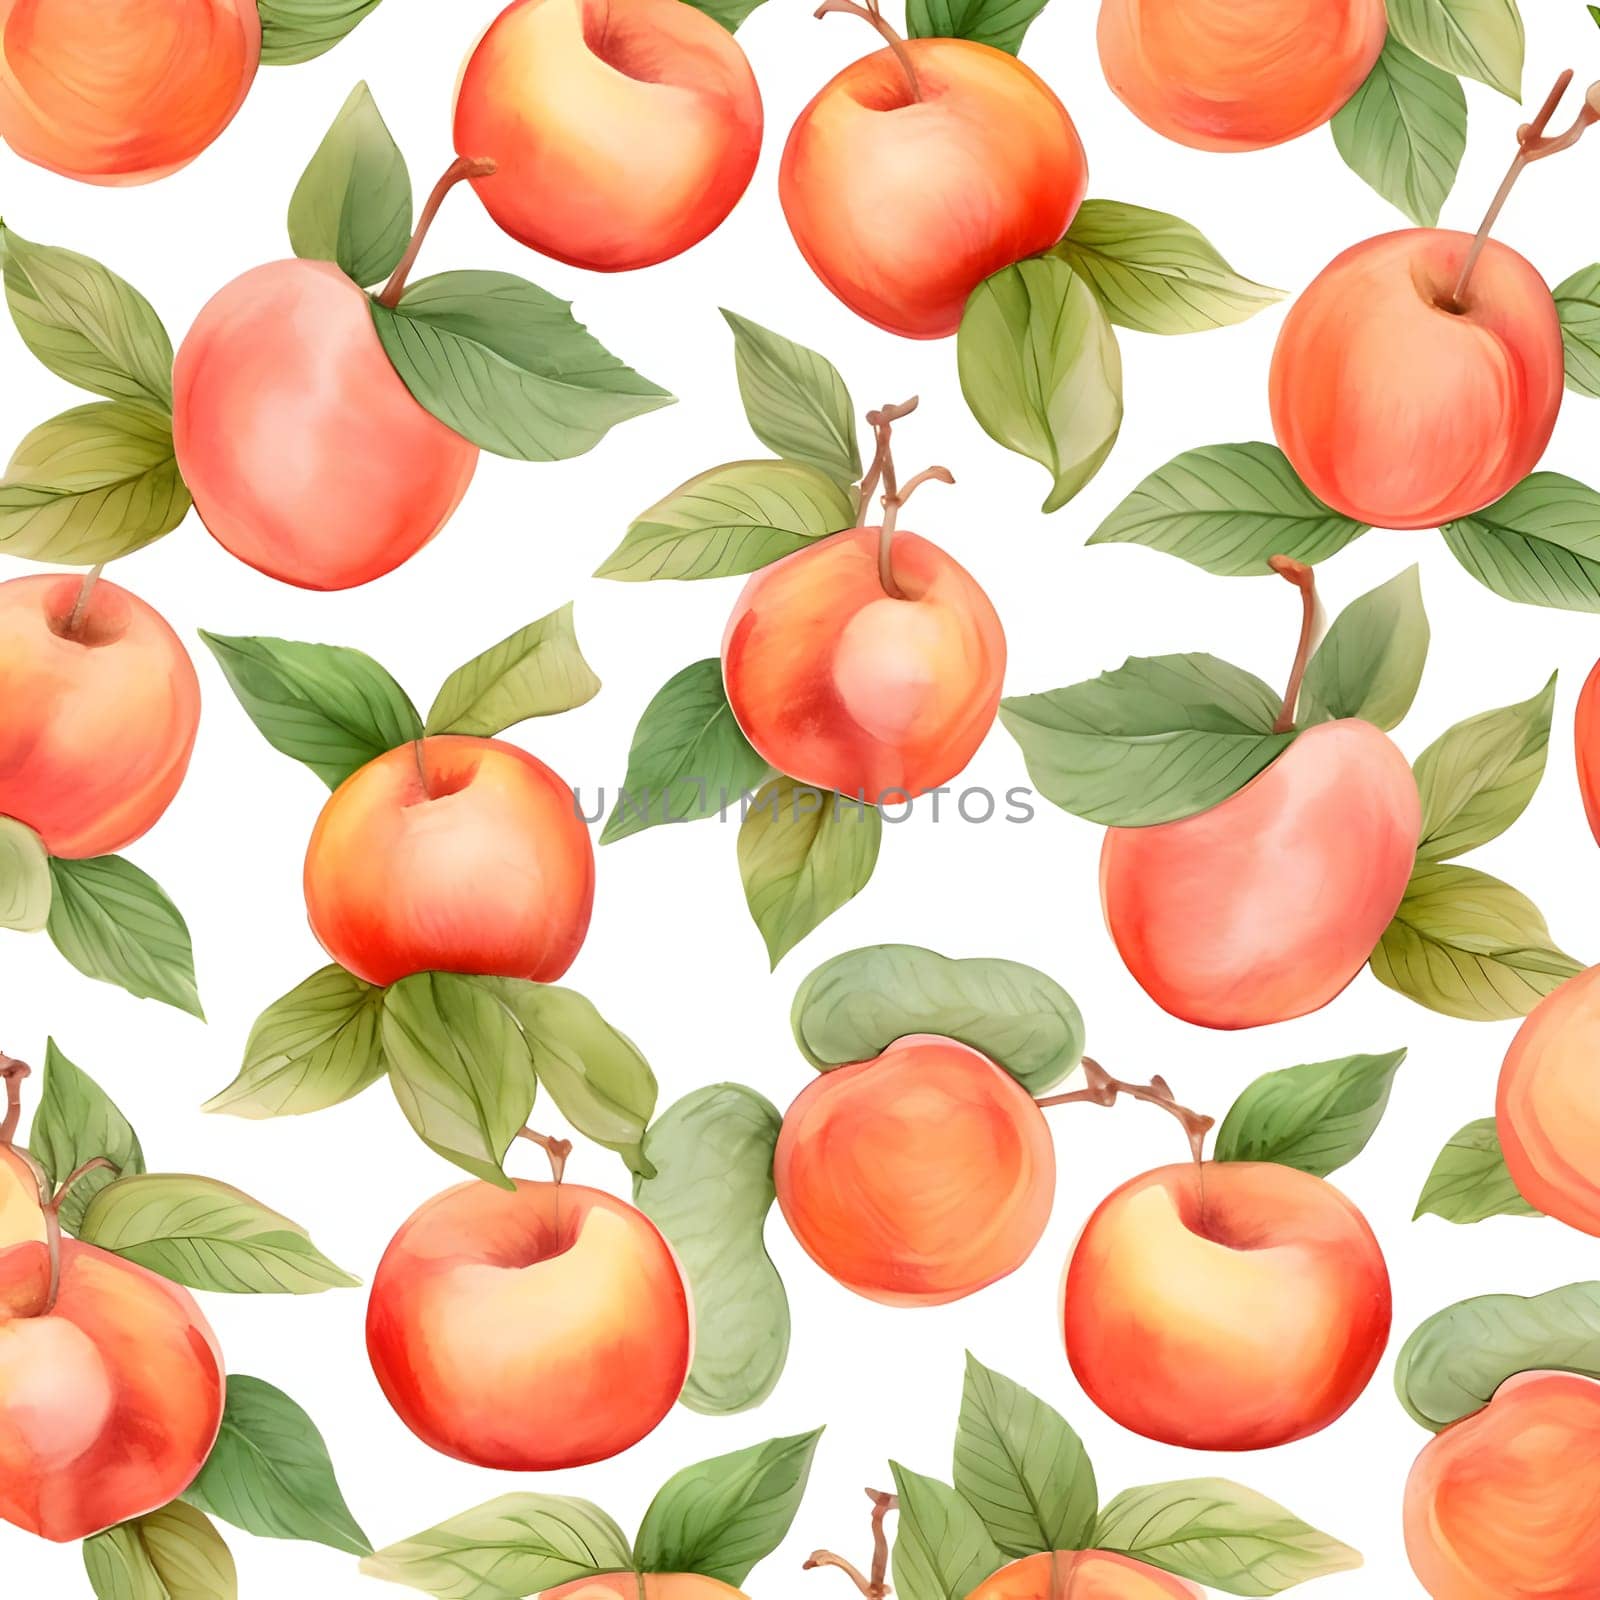 Patterns and banners backgrounds: Seamless pattern with apples and leaves. Watercolor illustration.